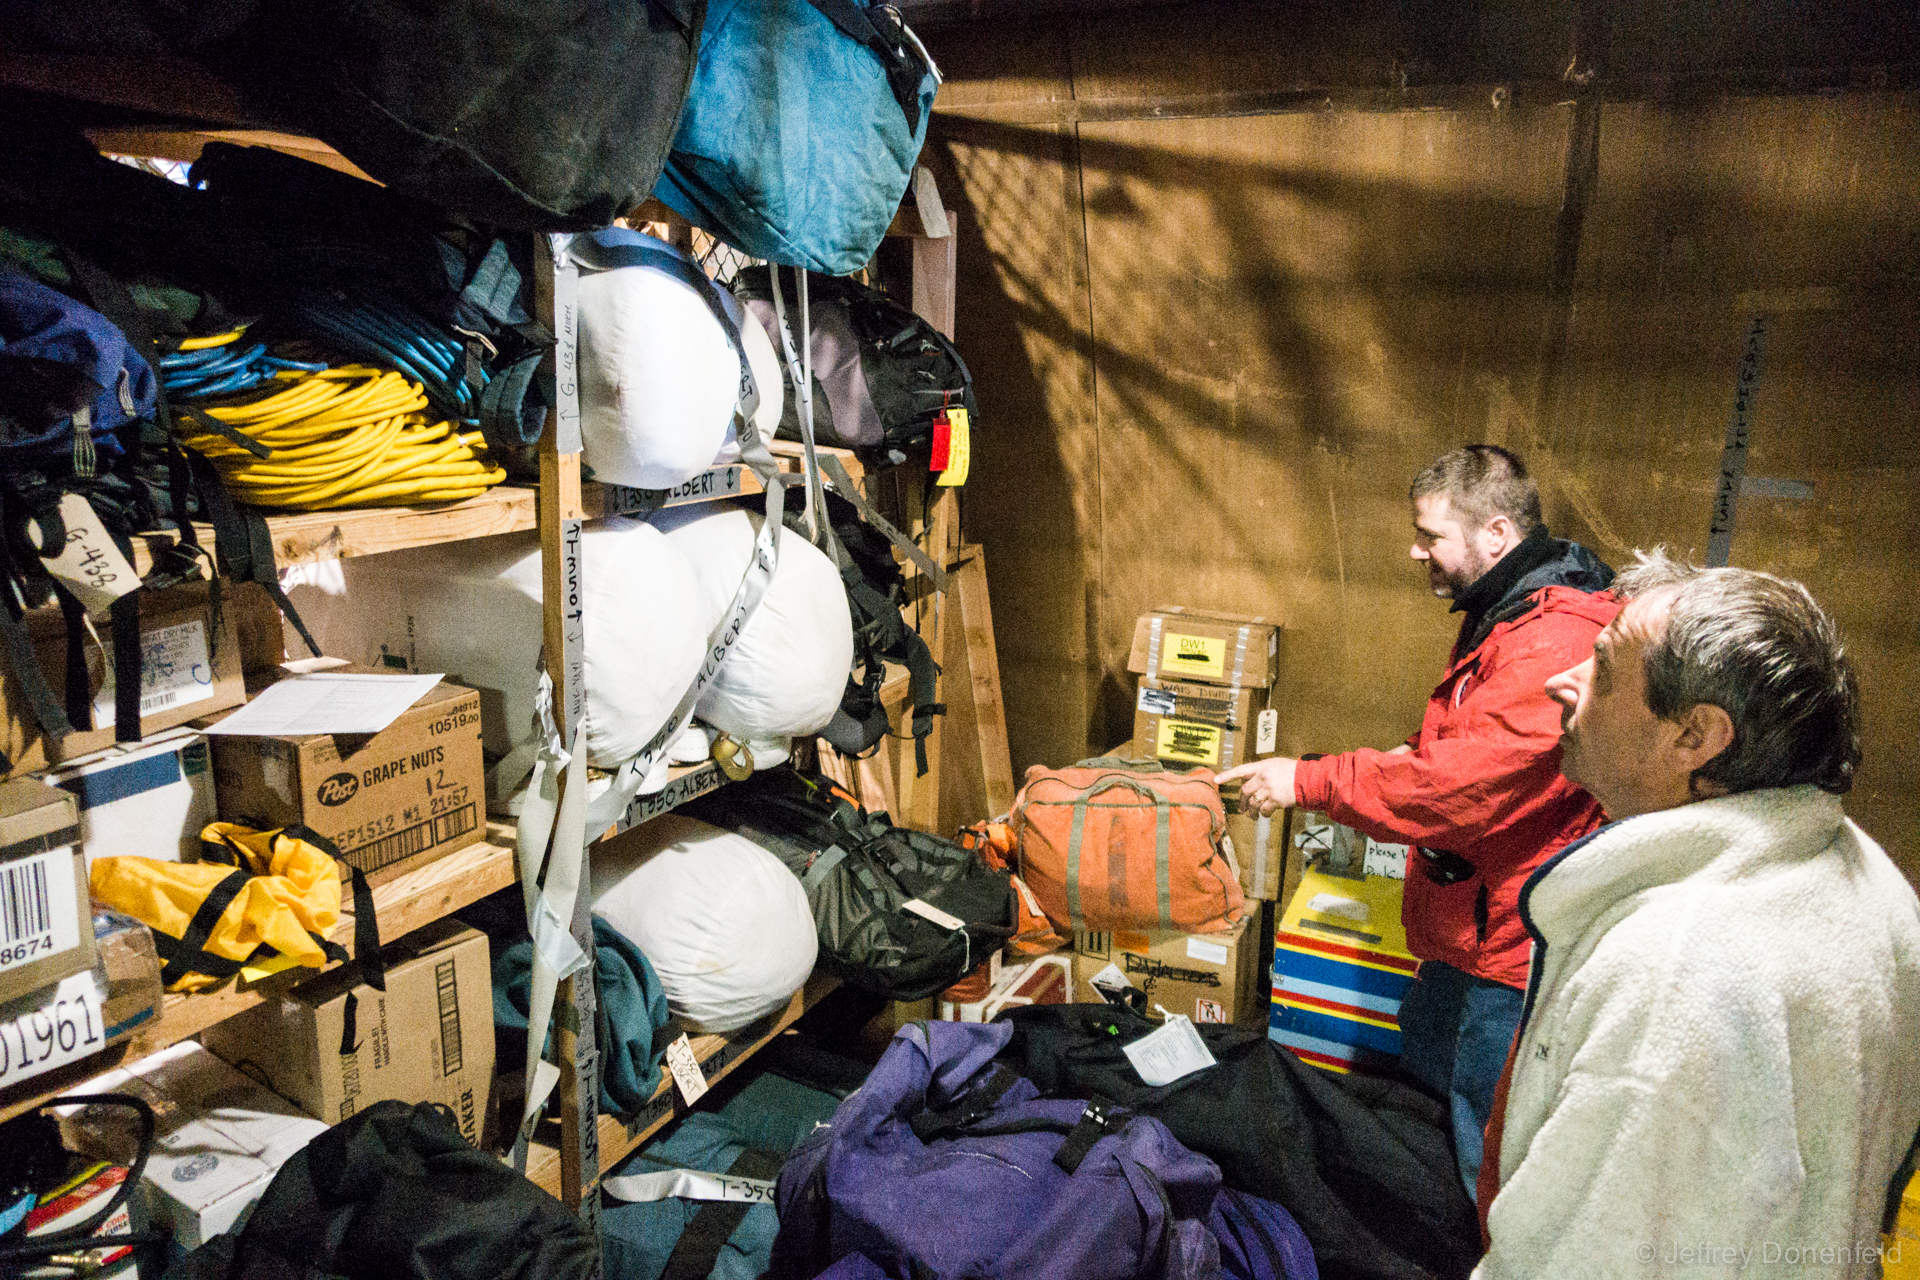 Going through our racks of gear in the cage. You can see sleeping bags, pads, boomerang bags, cots, emergency bags, and all sorts of other supplies.